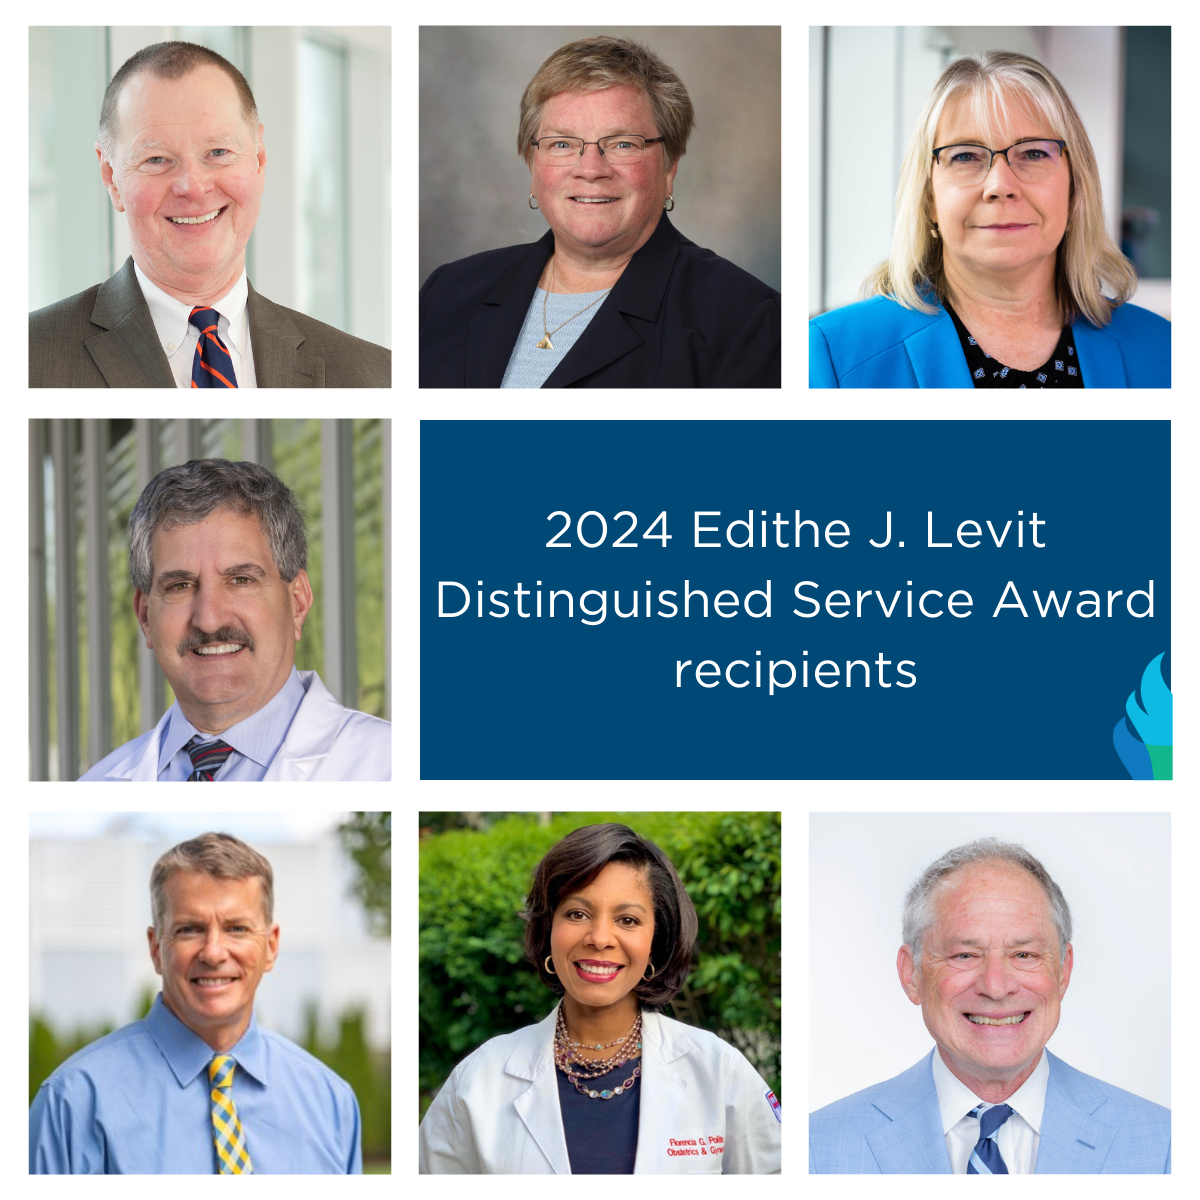 Collage of headshots of the Distinguished Service Award recipients.